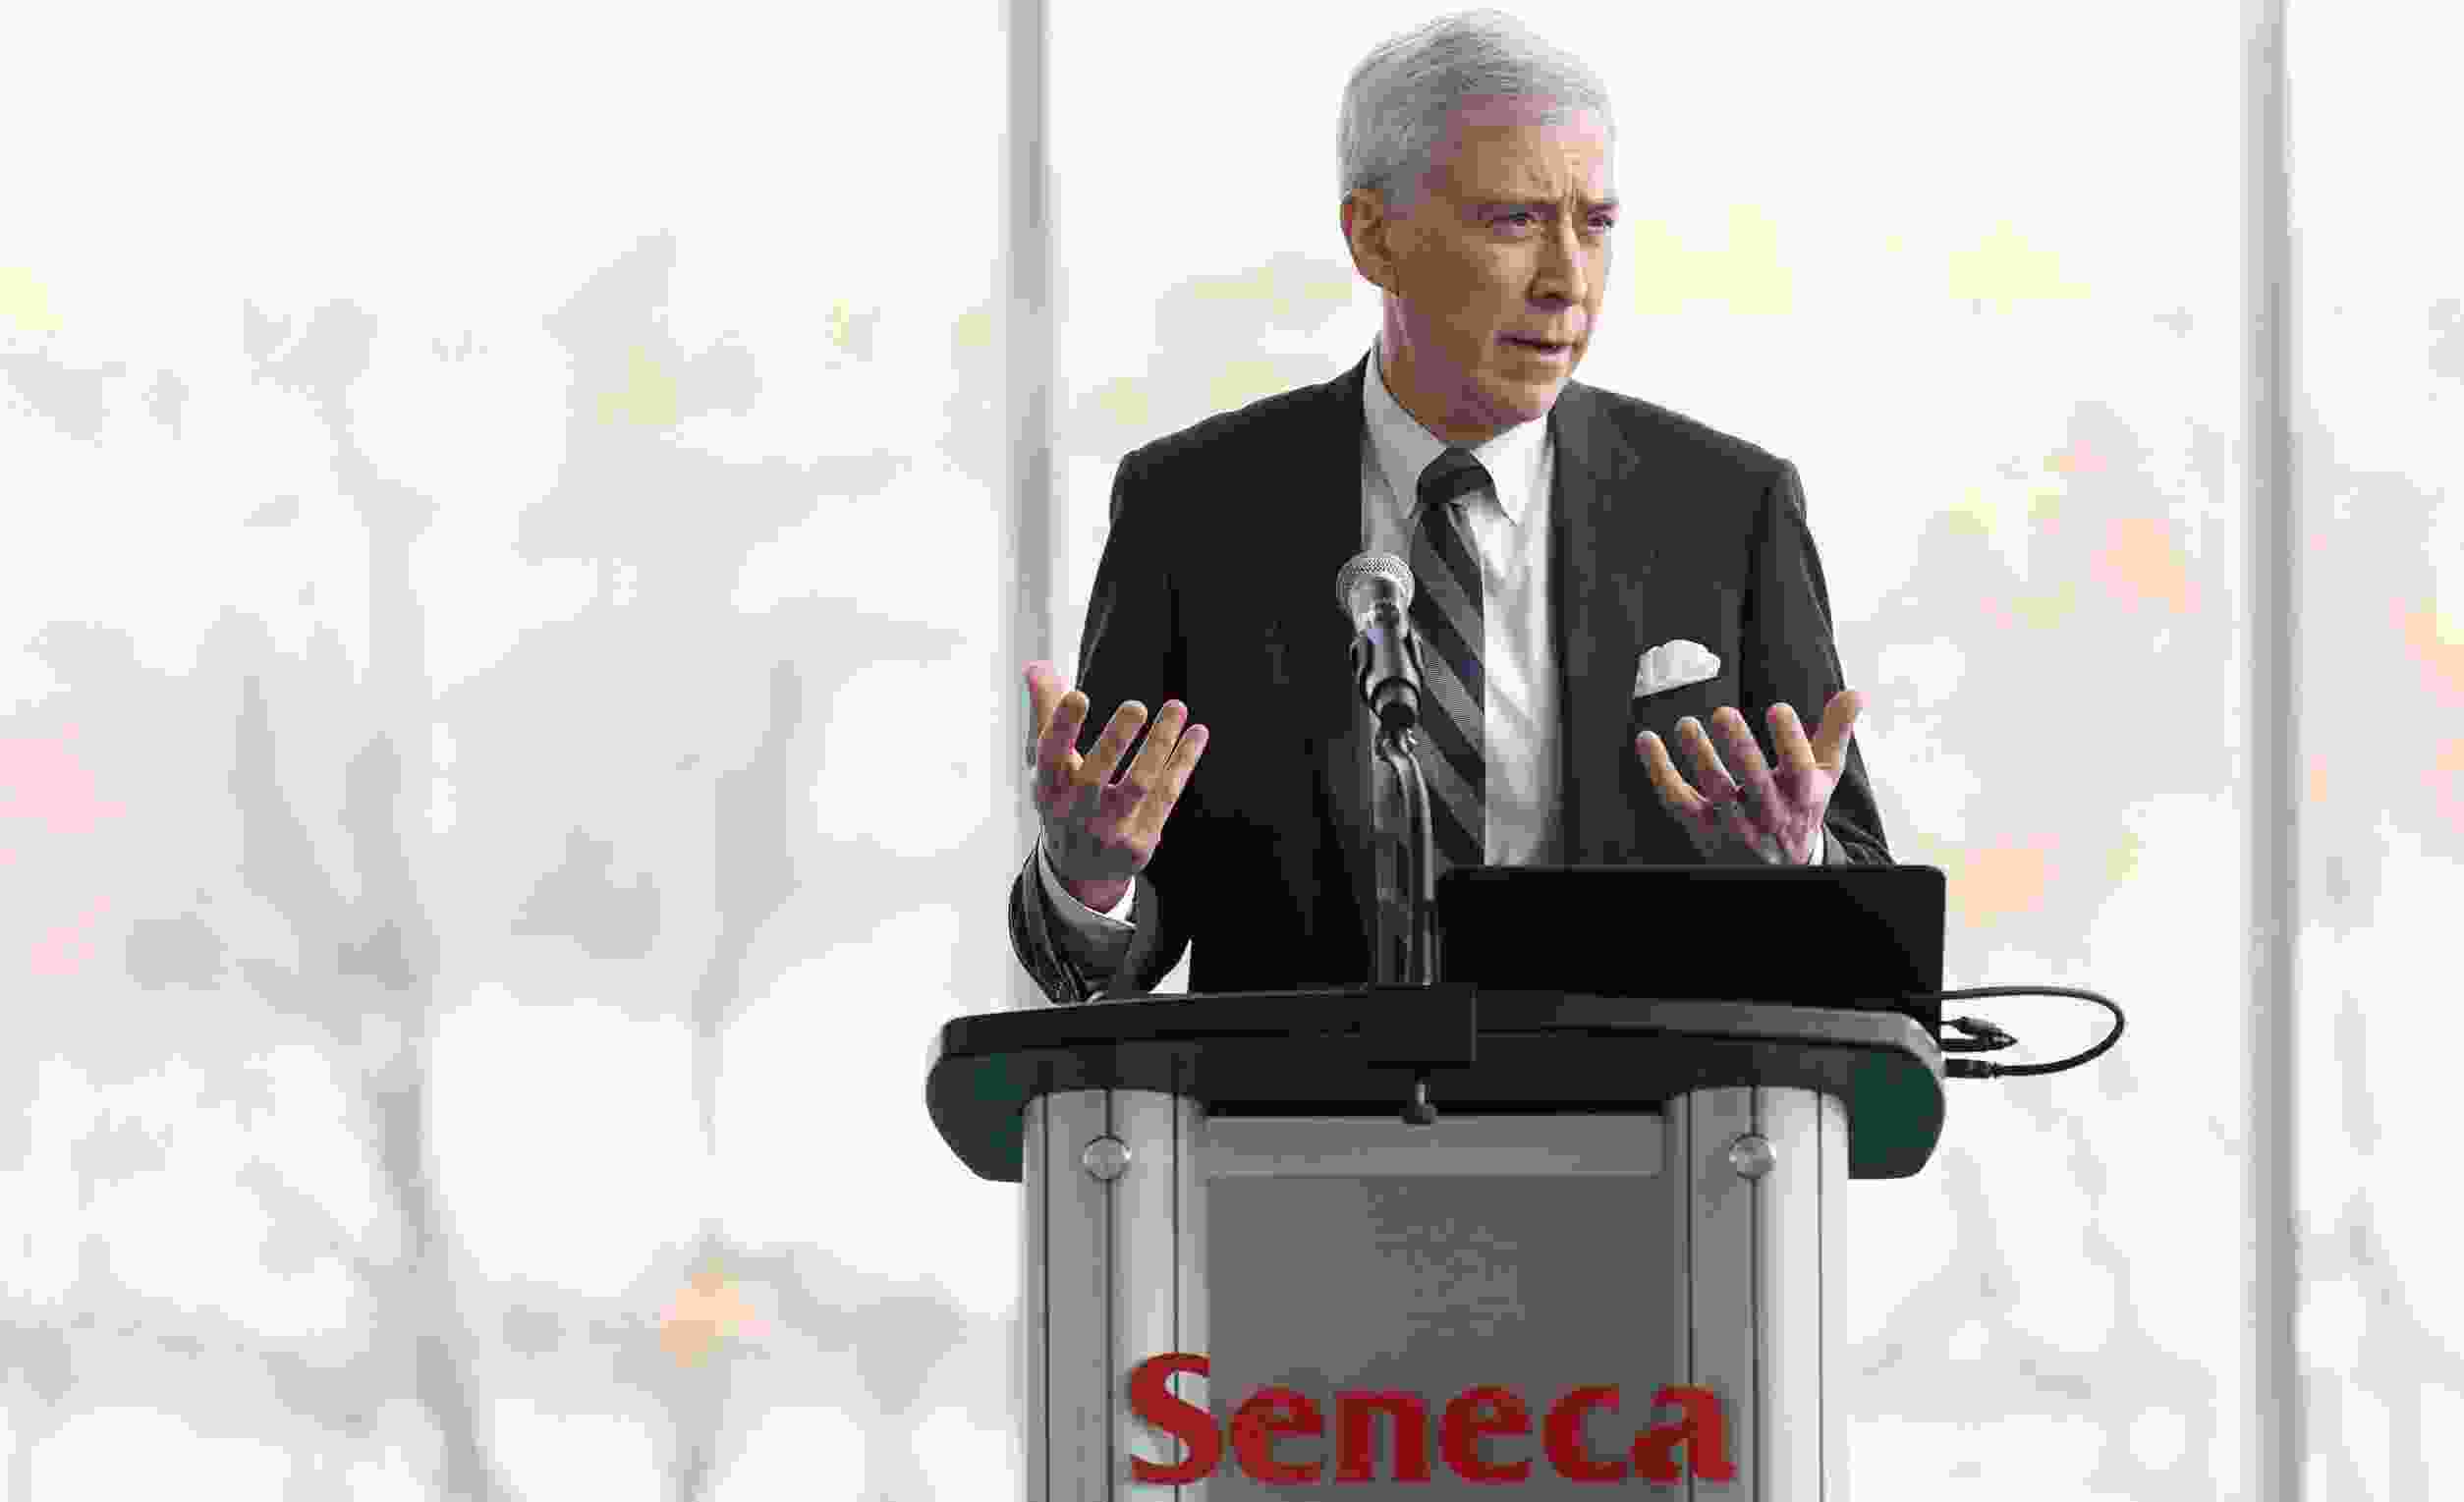 Seneca College president David Agnew: Ruling that vaccination was mandatory to be on campus “was just the right thing to do to continue to protect the health and safety of our community.”